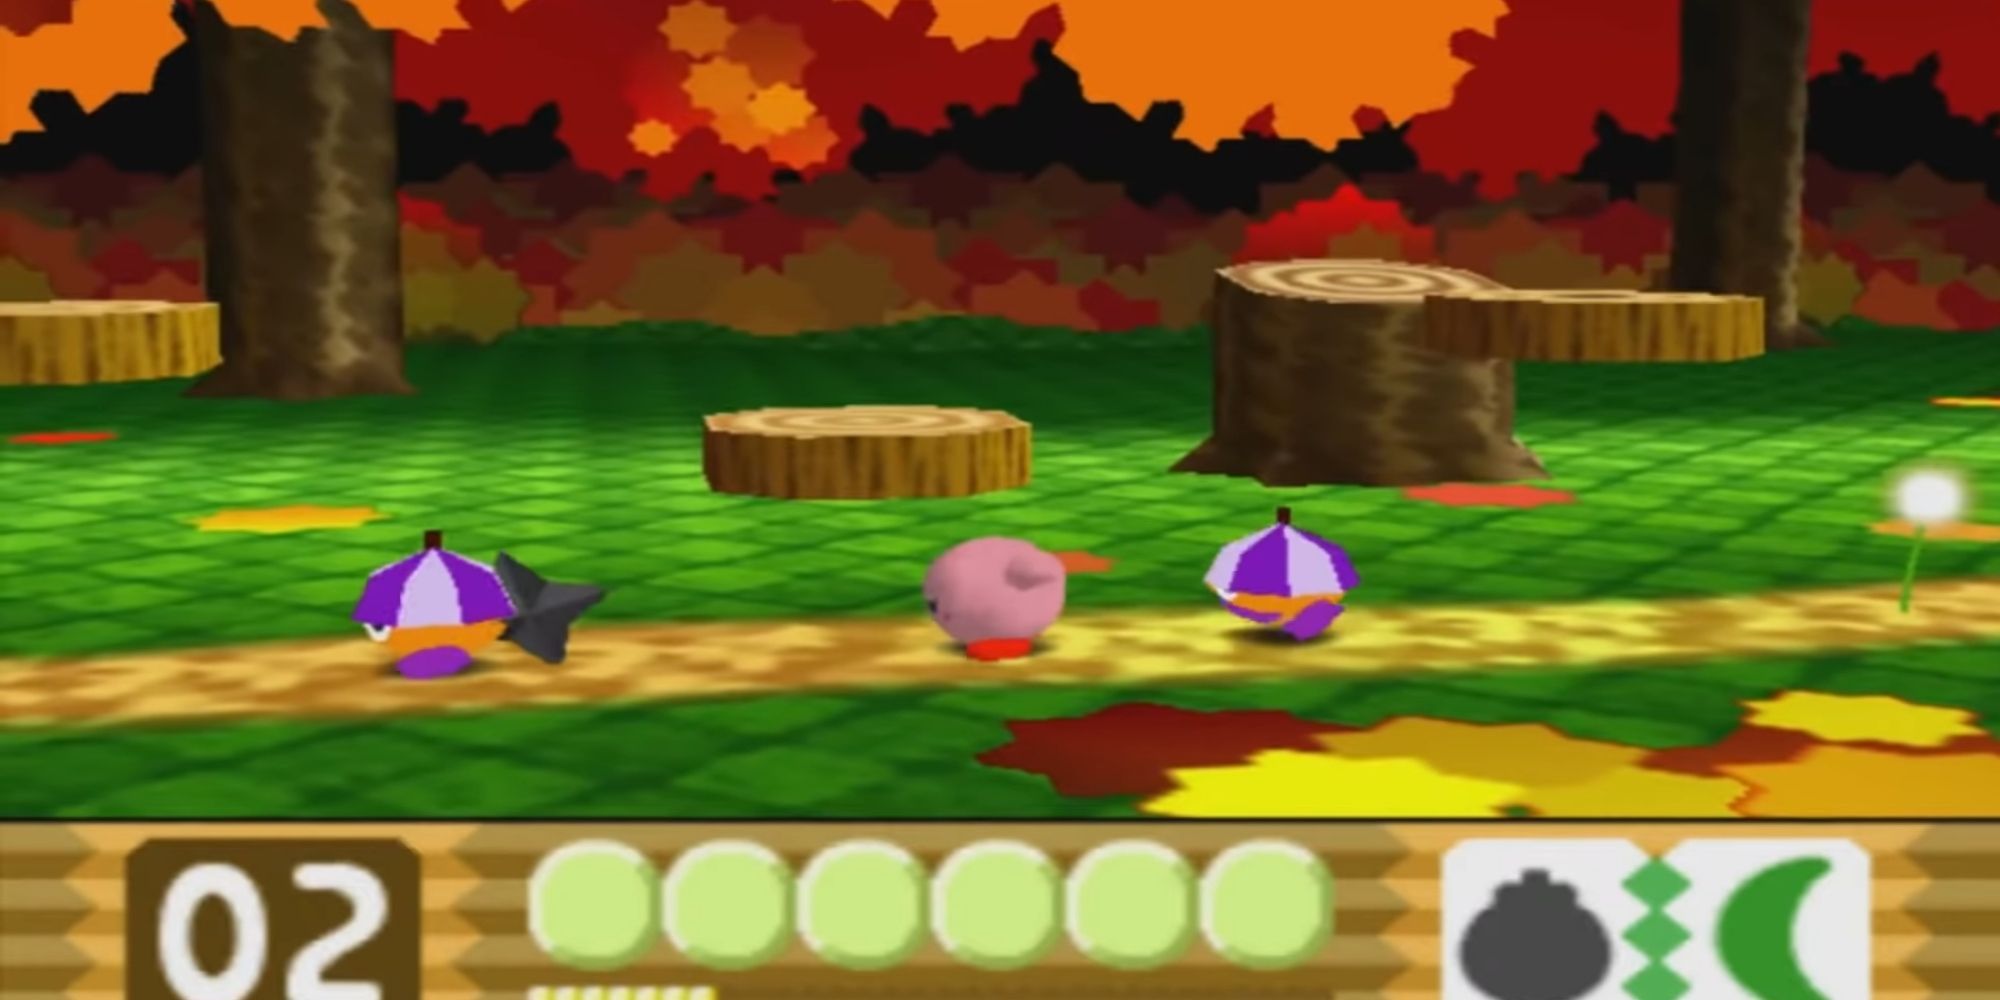 Kirby throws Shuriken Bomb at Bumber's back in the forest